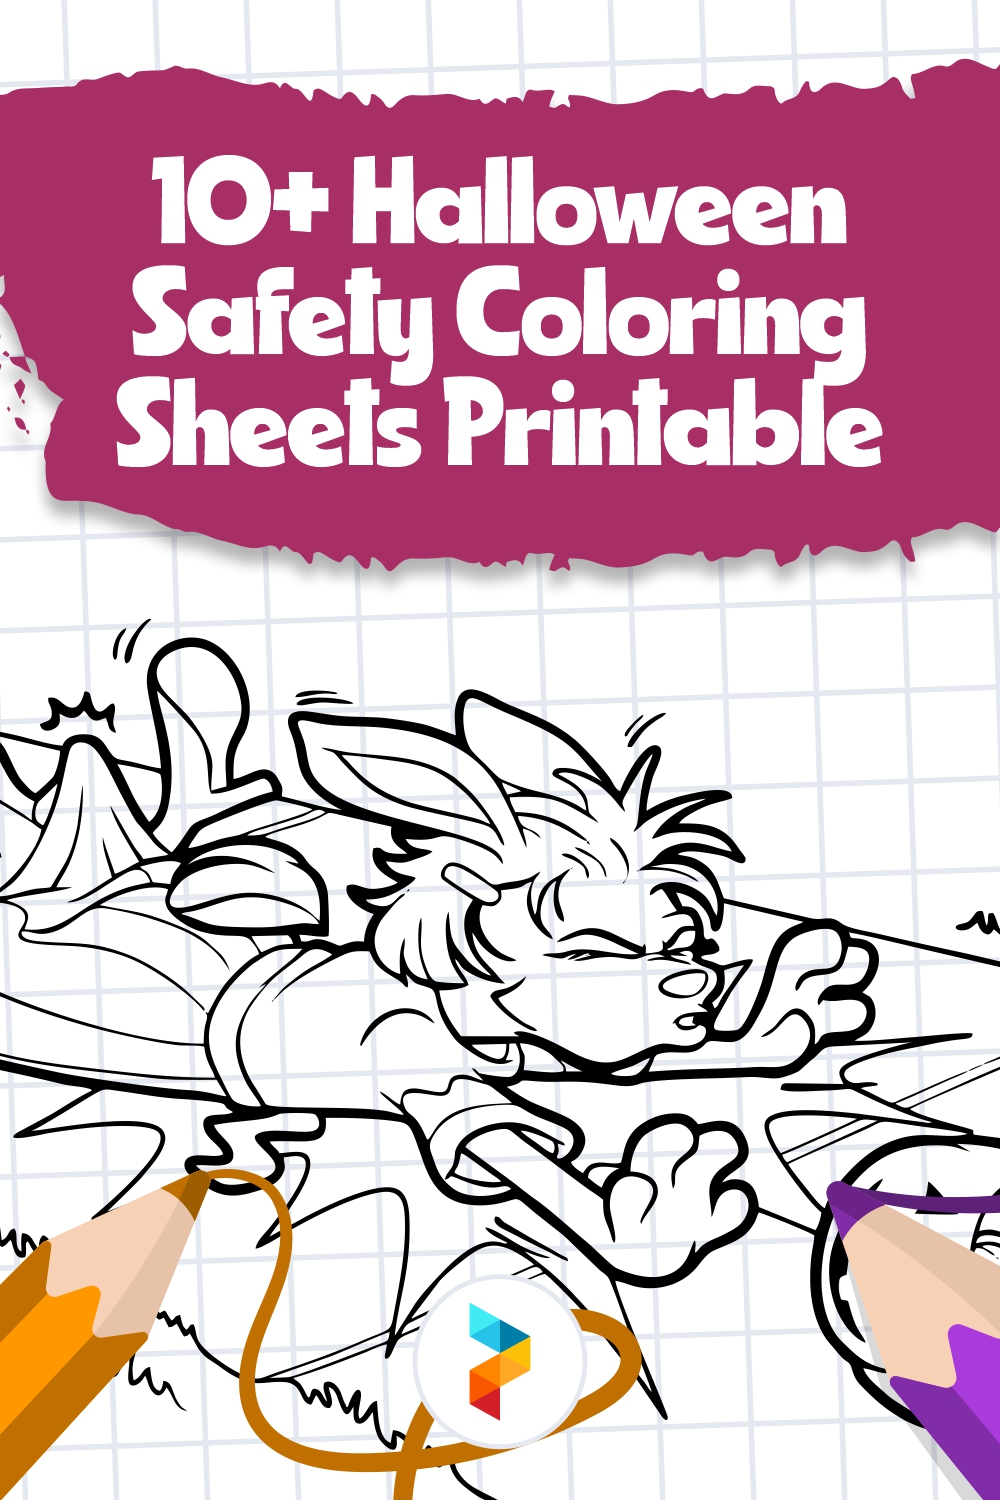 Halloween Safety Coloring Sheets Printable